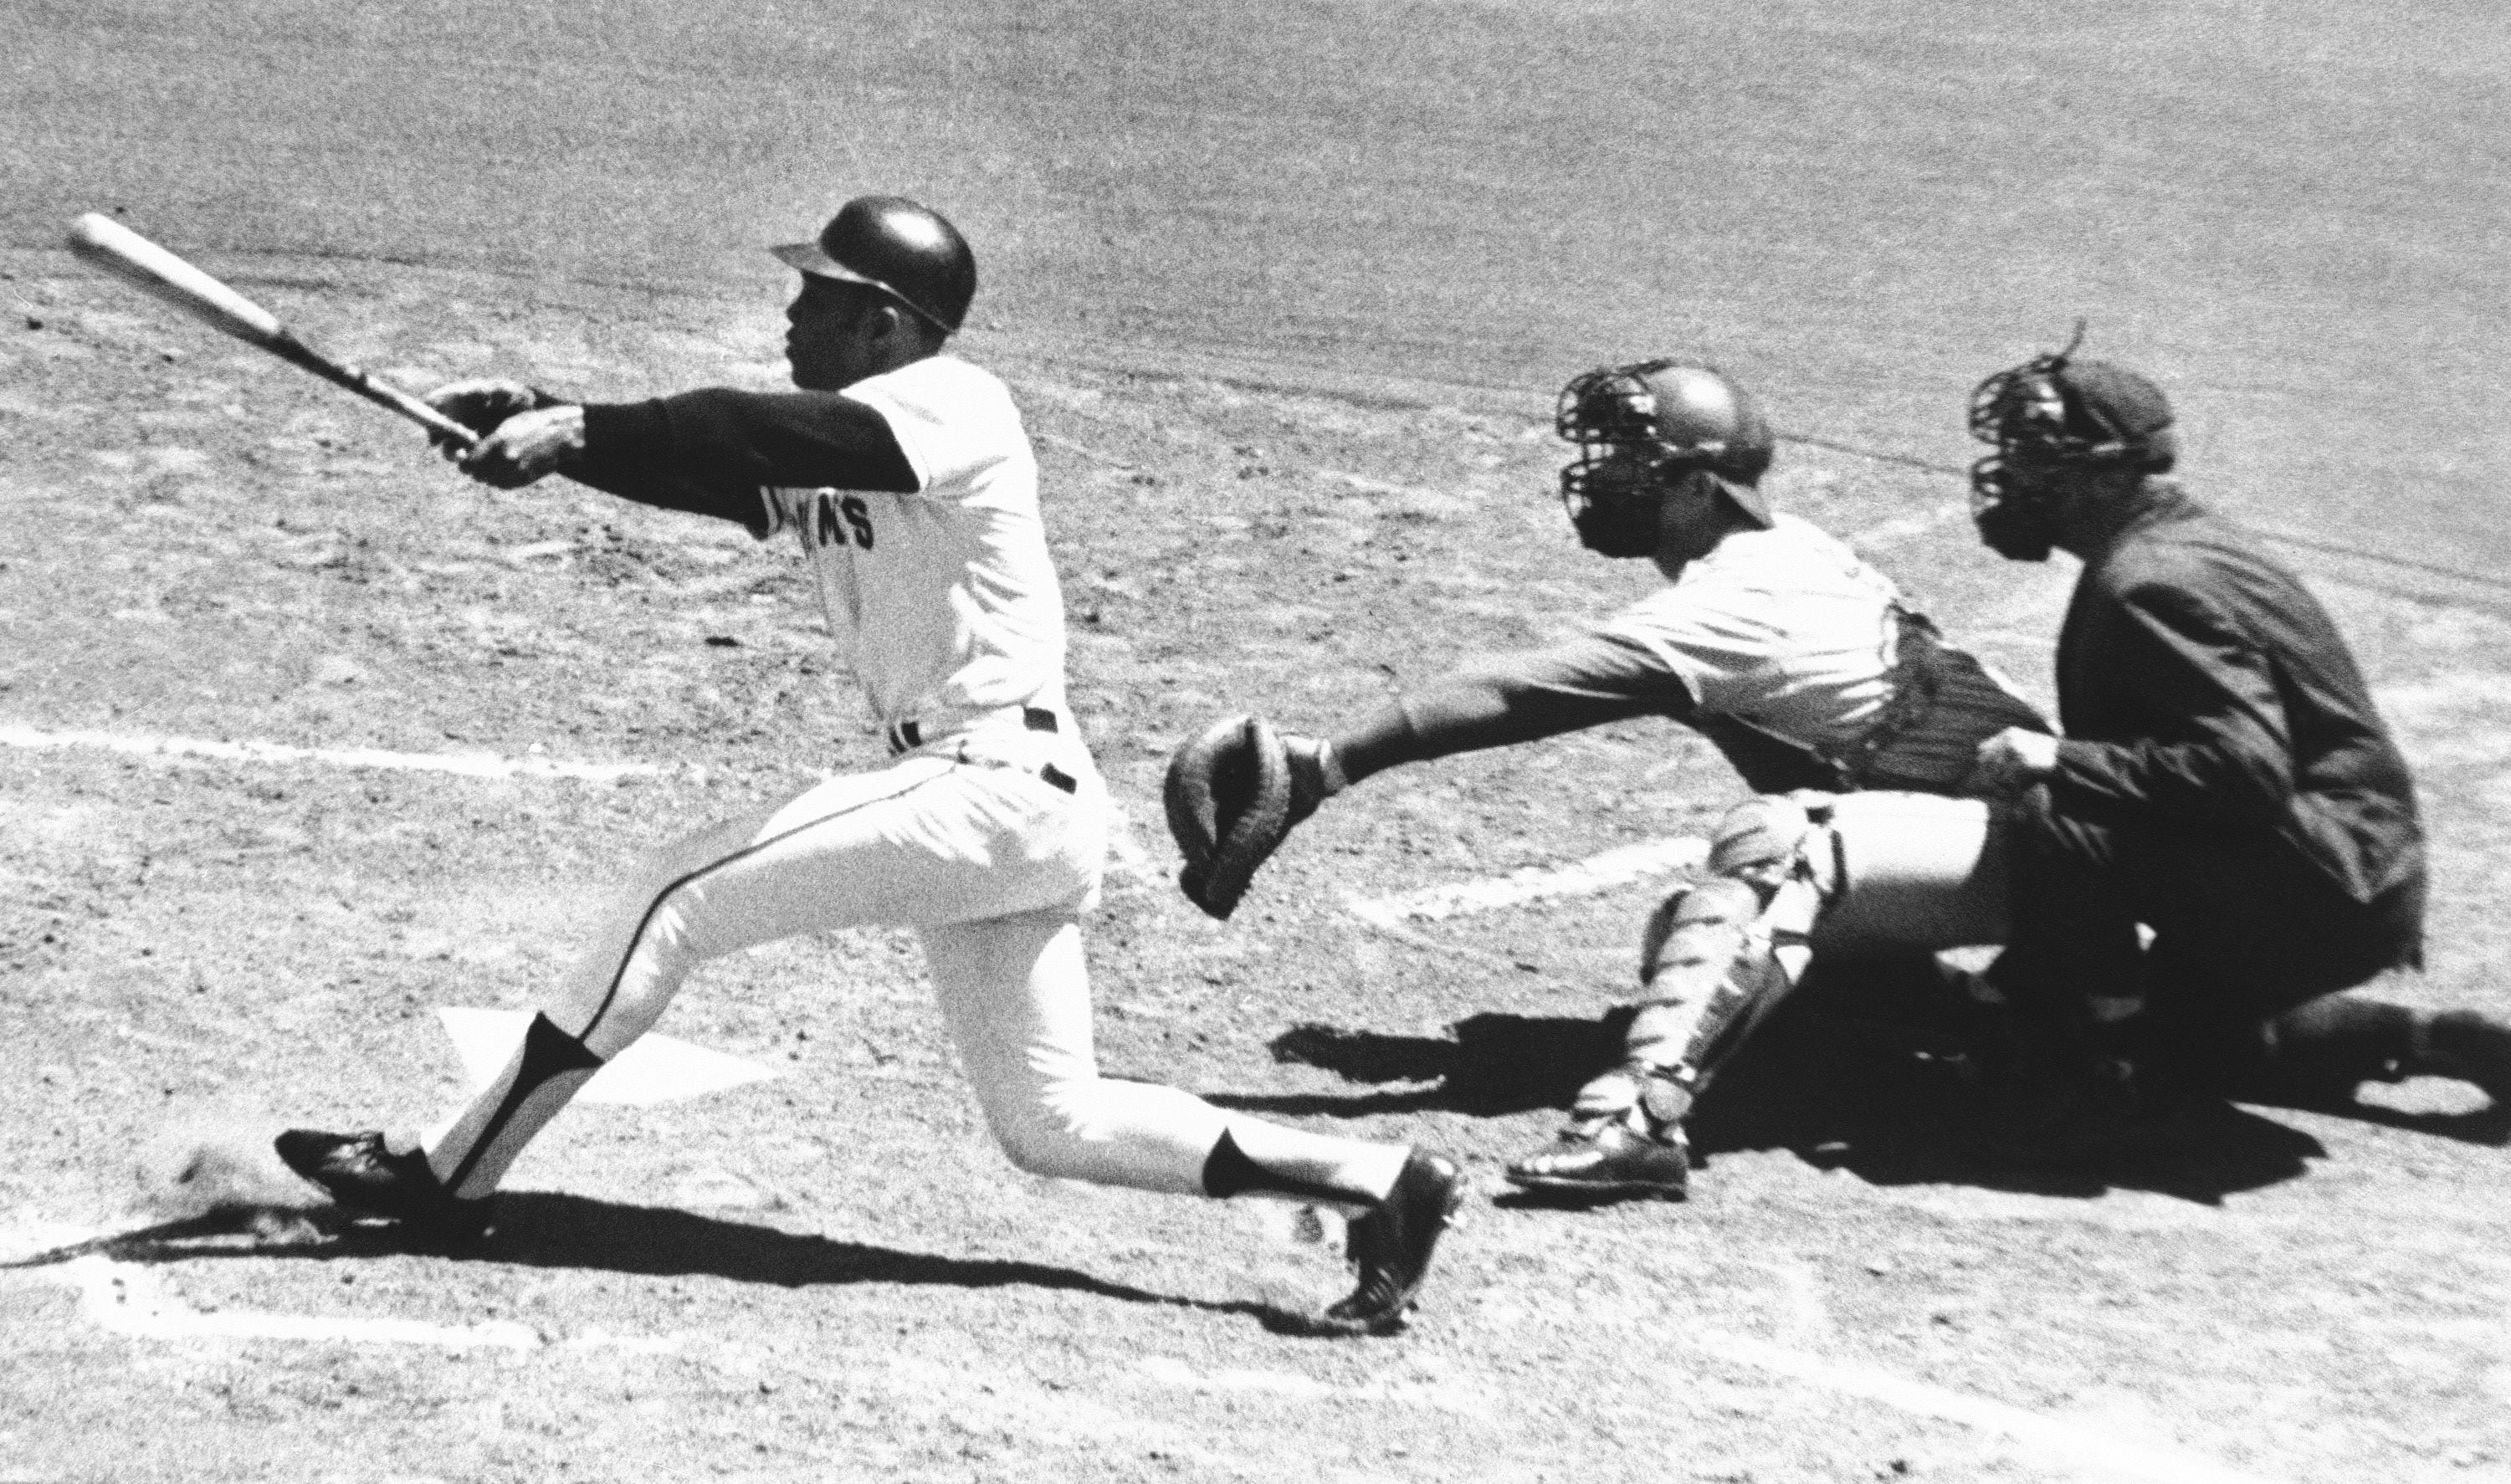 San Francisco Giants' Willie Mays watches the 3,000th hit of his career, a single to left, in the second inning against the Montreal Expos at Candlestick Park in San Francisco on July 18, 1970